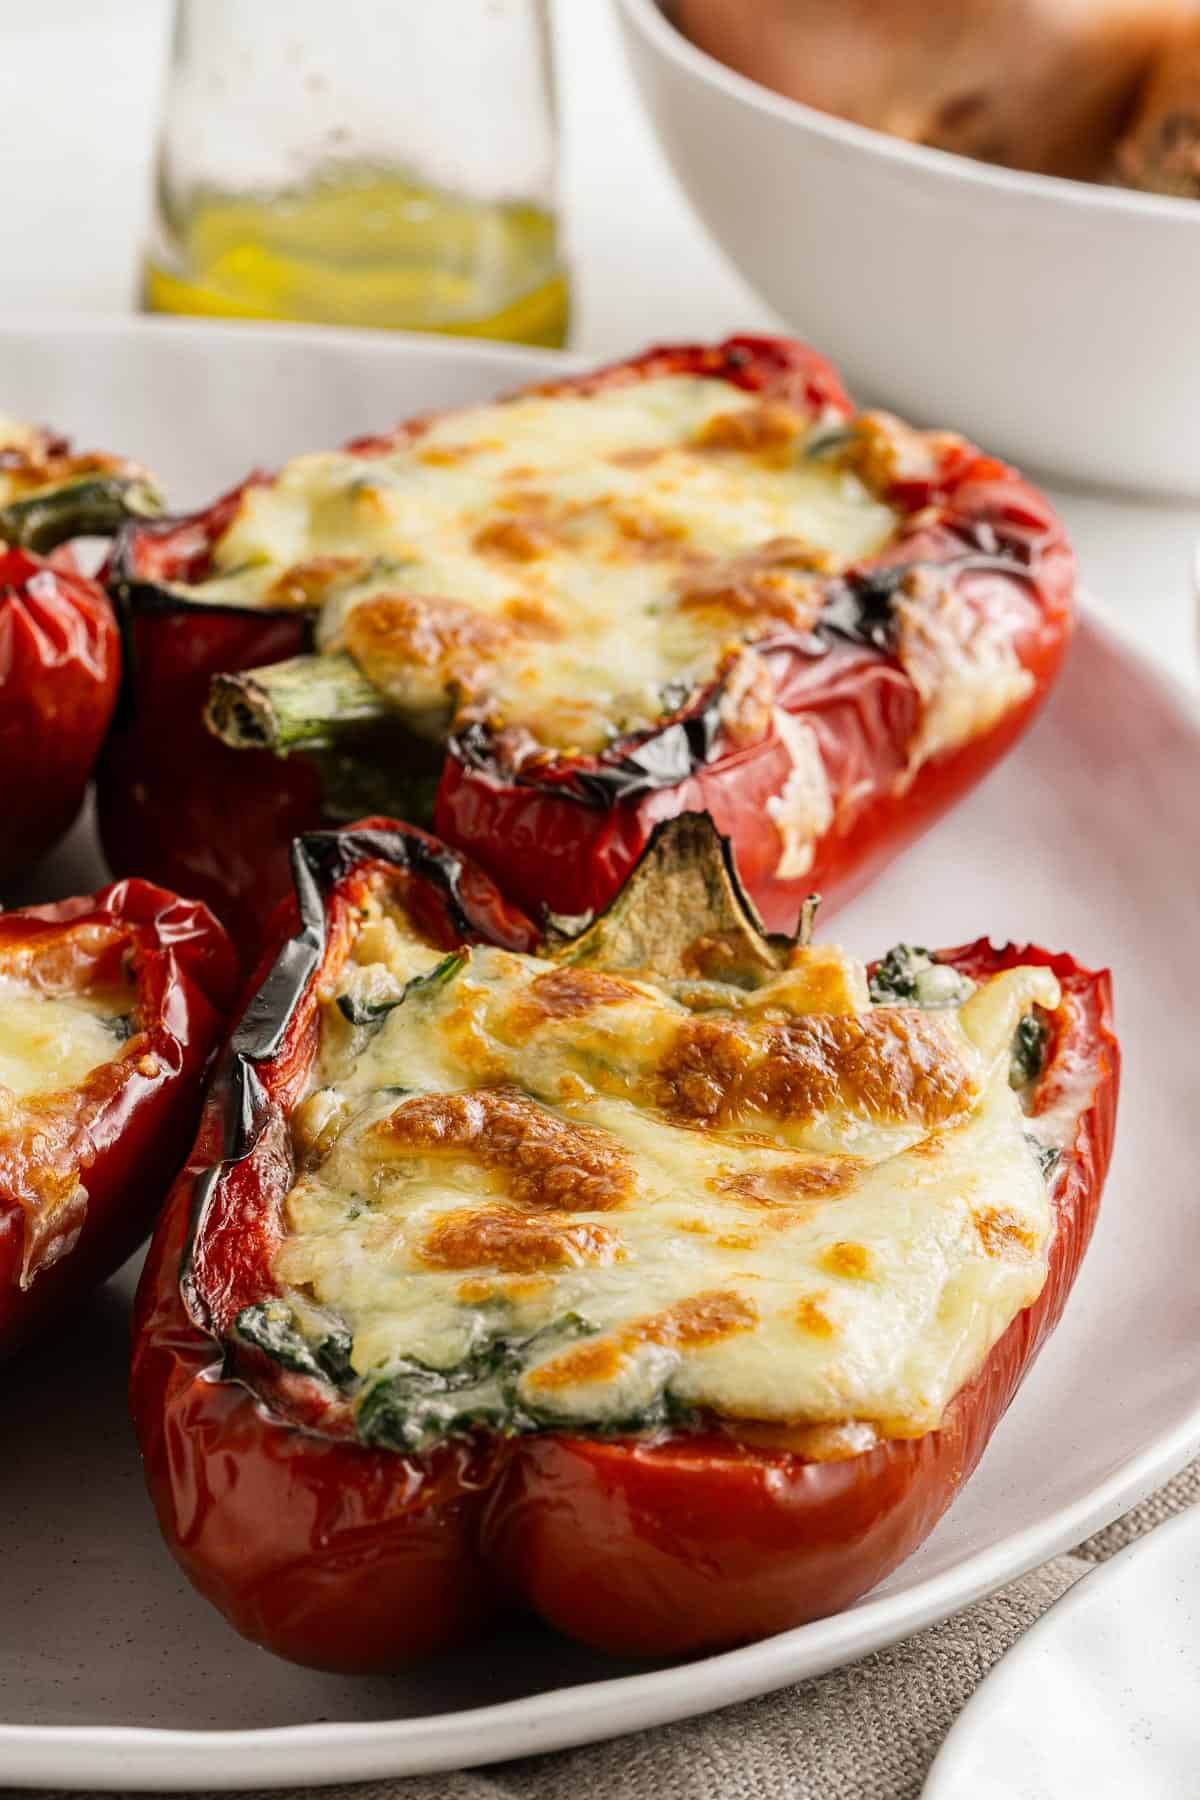 baked red bell peppers, stuffed with cheese, spinach, onion, and garlic